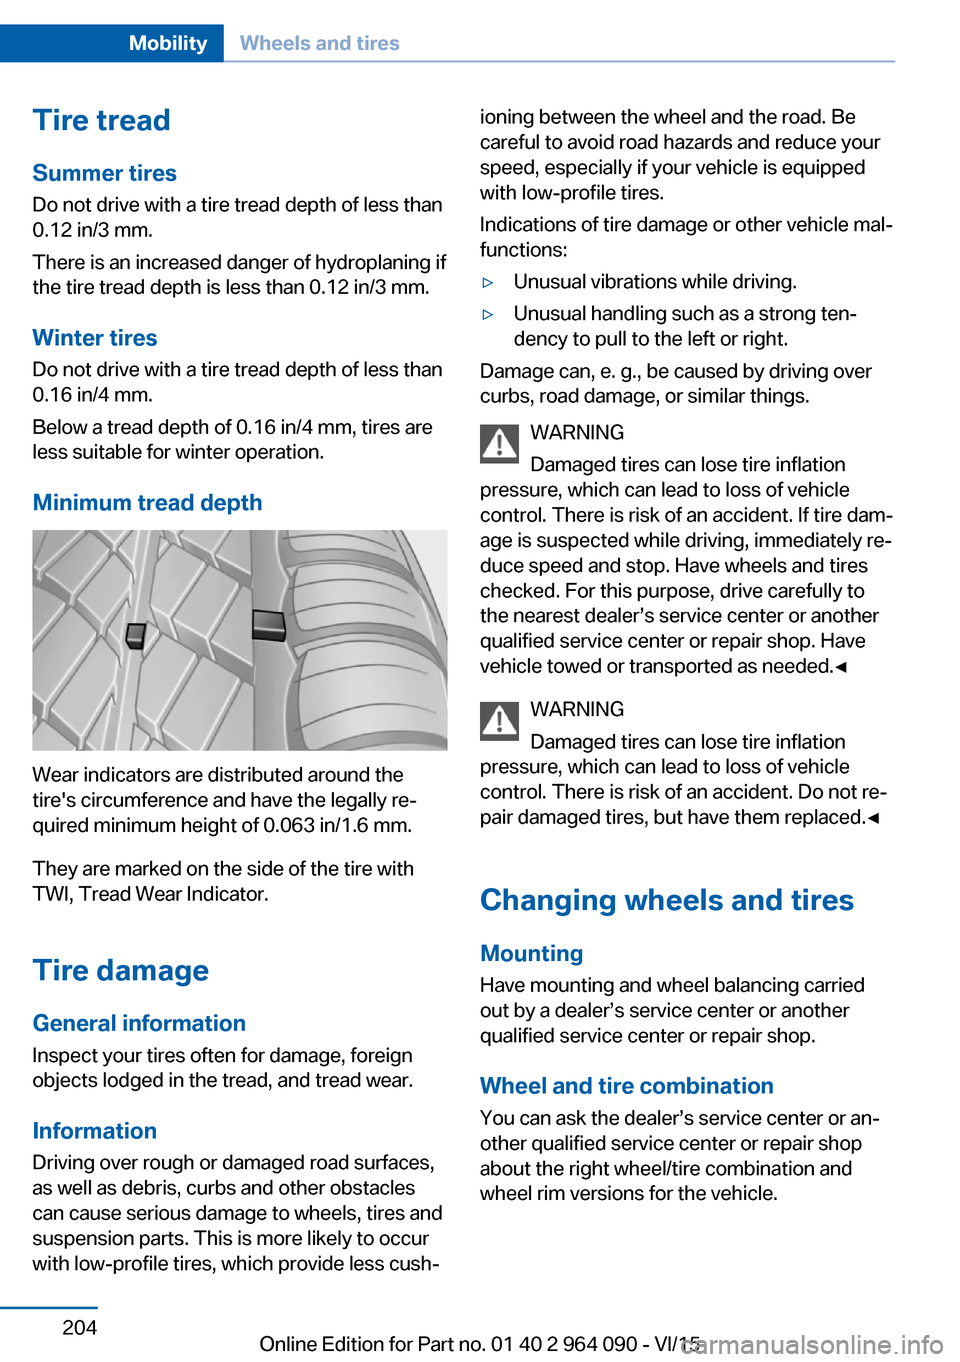 BMW X5M 2015 F85 Owners Guide Tire treadSummer tires
Do not drive with a tire tread depth of less than
0.12 in/3 mm.
There is an increased danger of hydroplaning if
the tire tread depth is less than 0.12 in/3 mm.
Winter tires
Do n